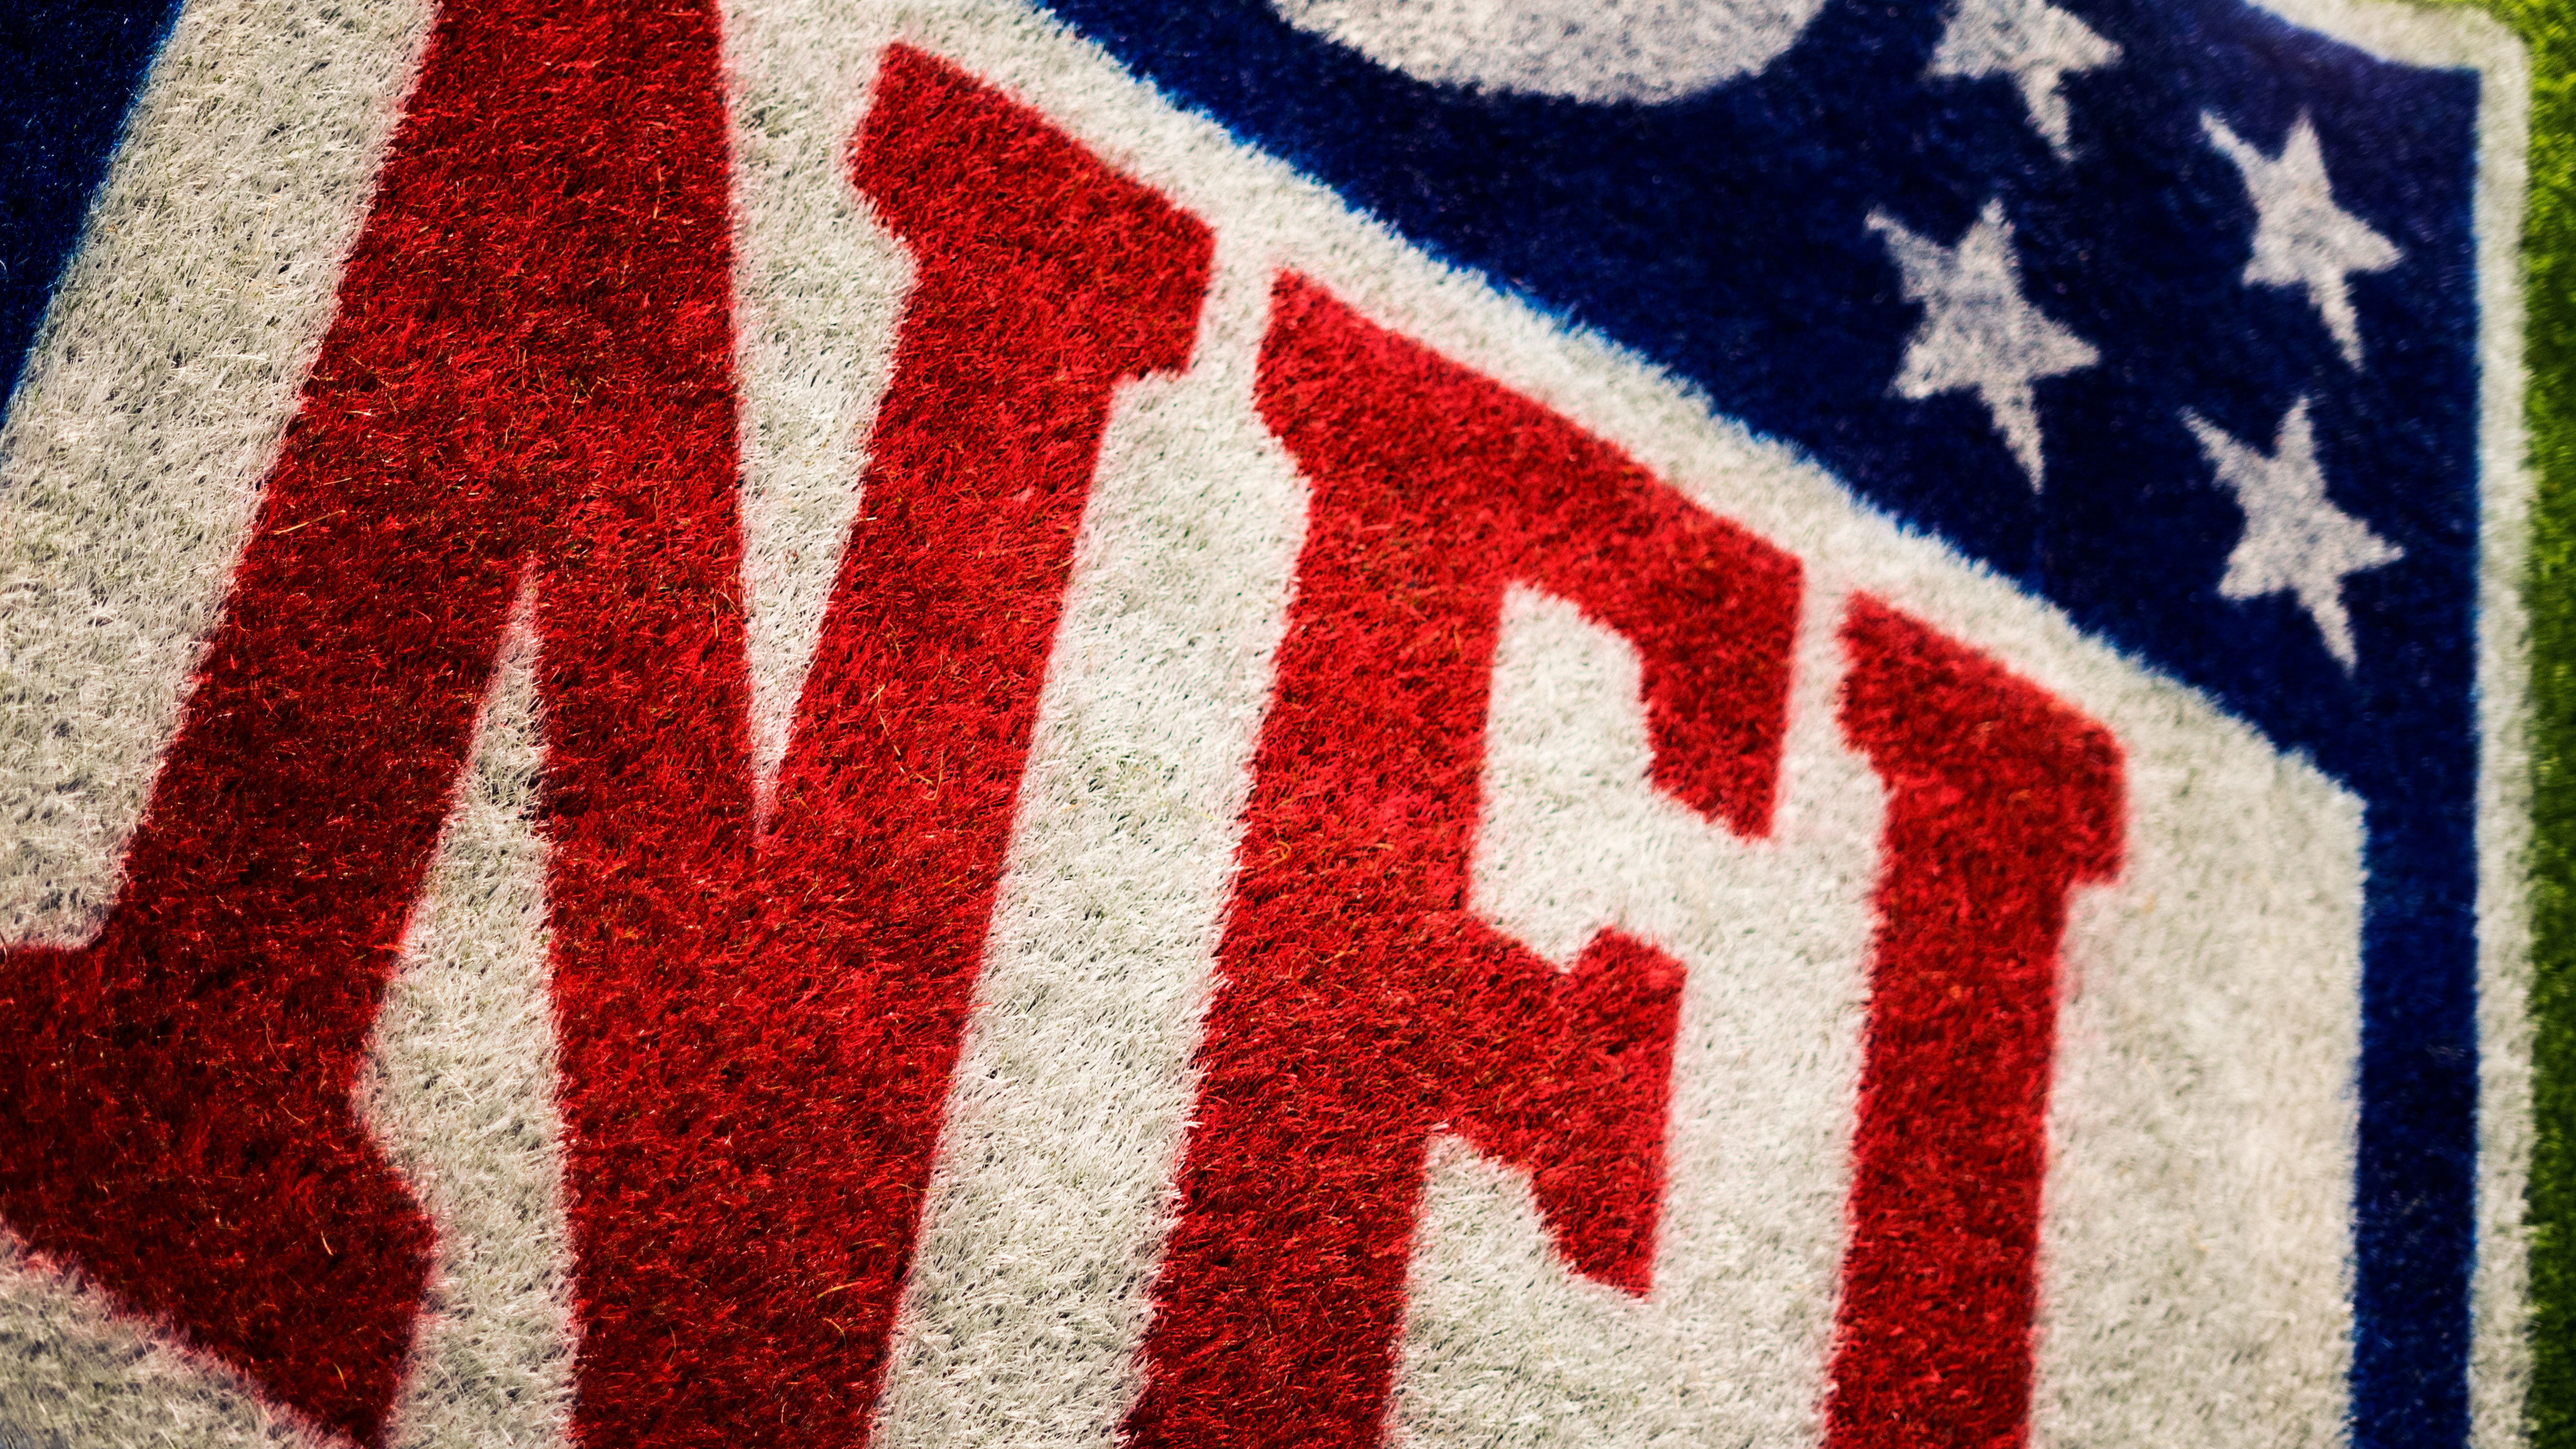 How fans can prepare for the new NFL season